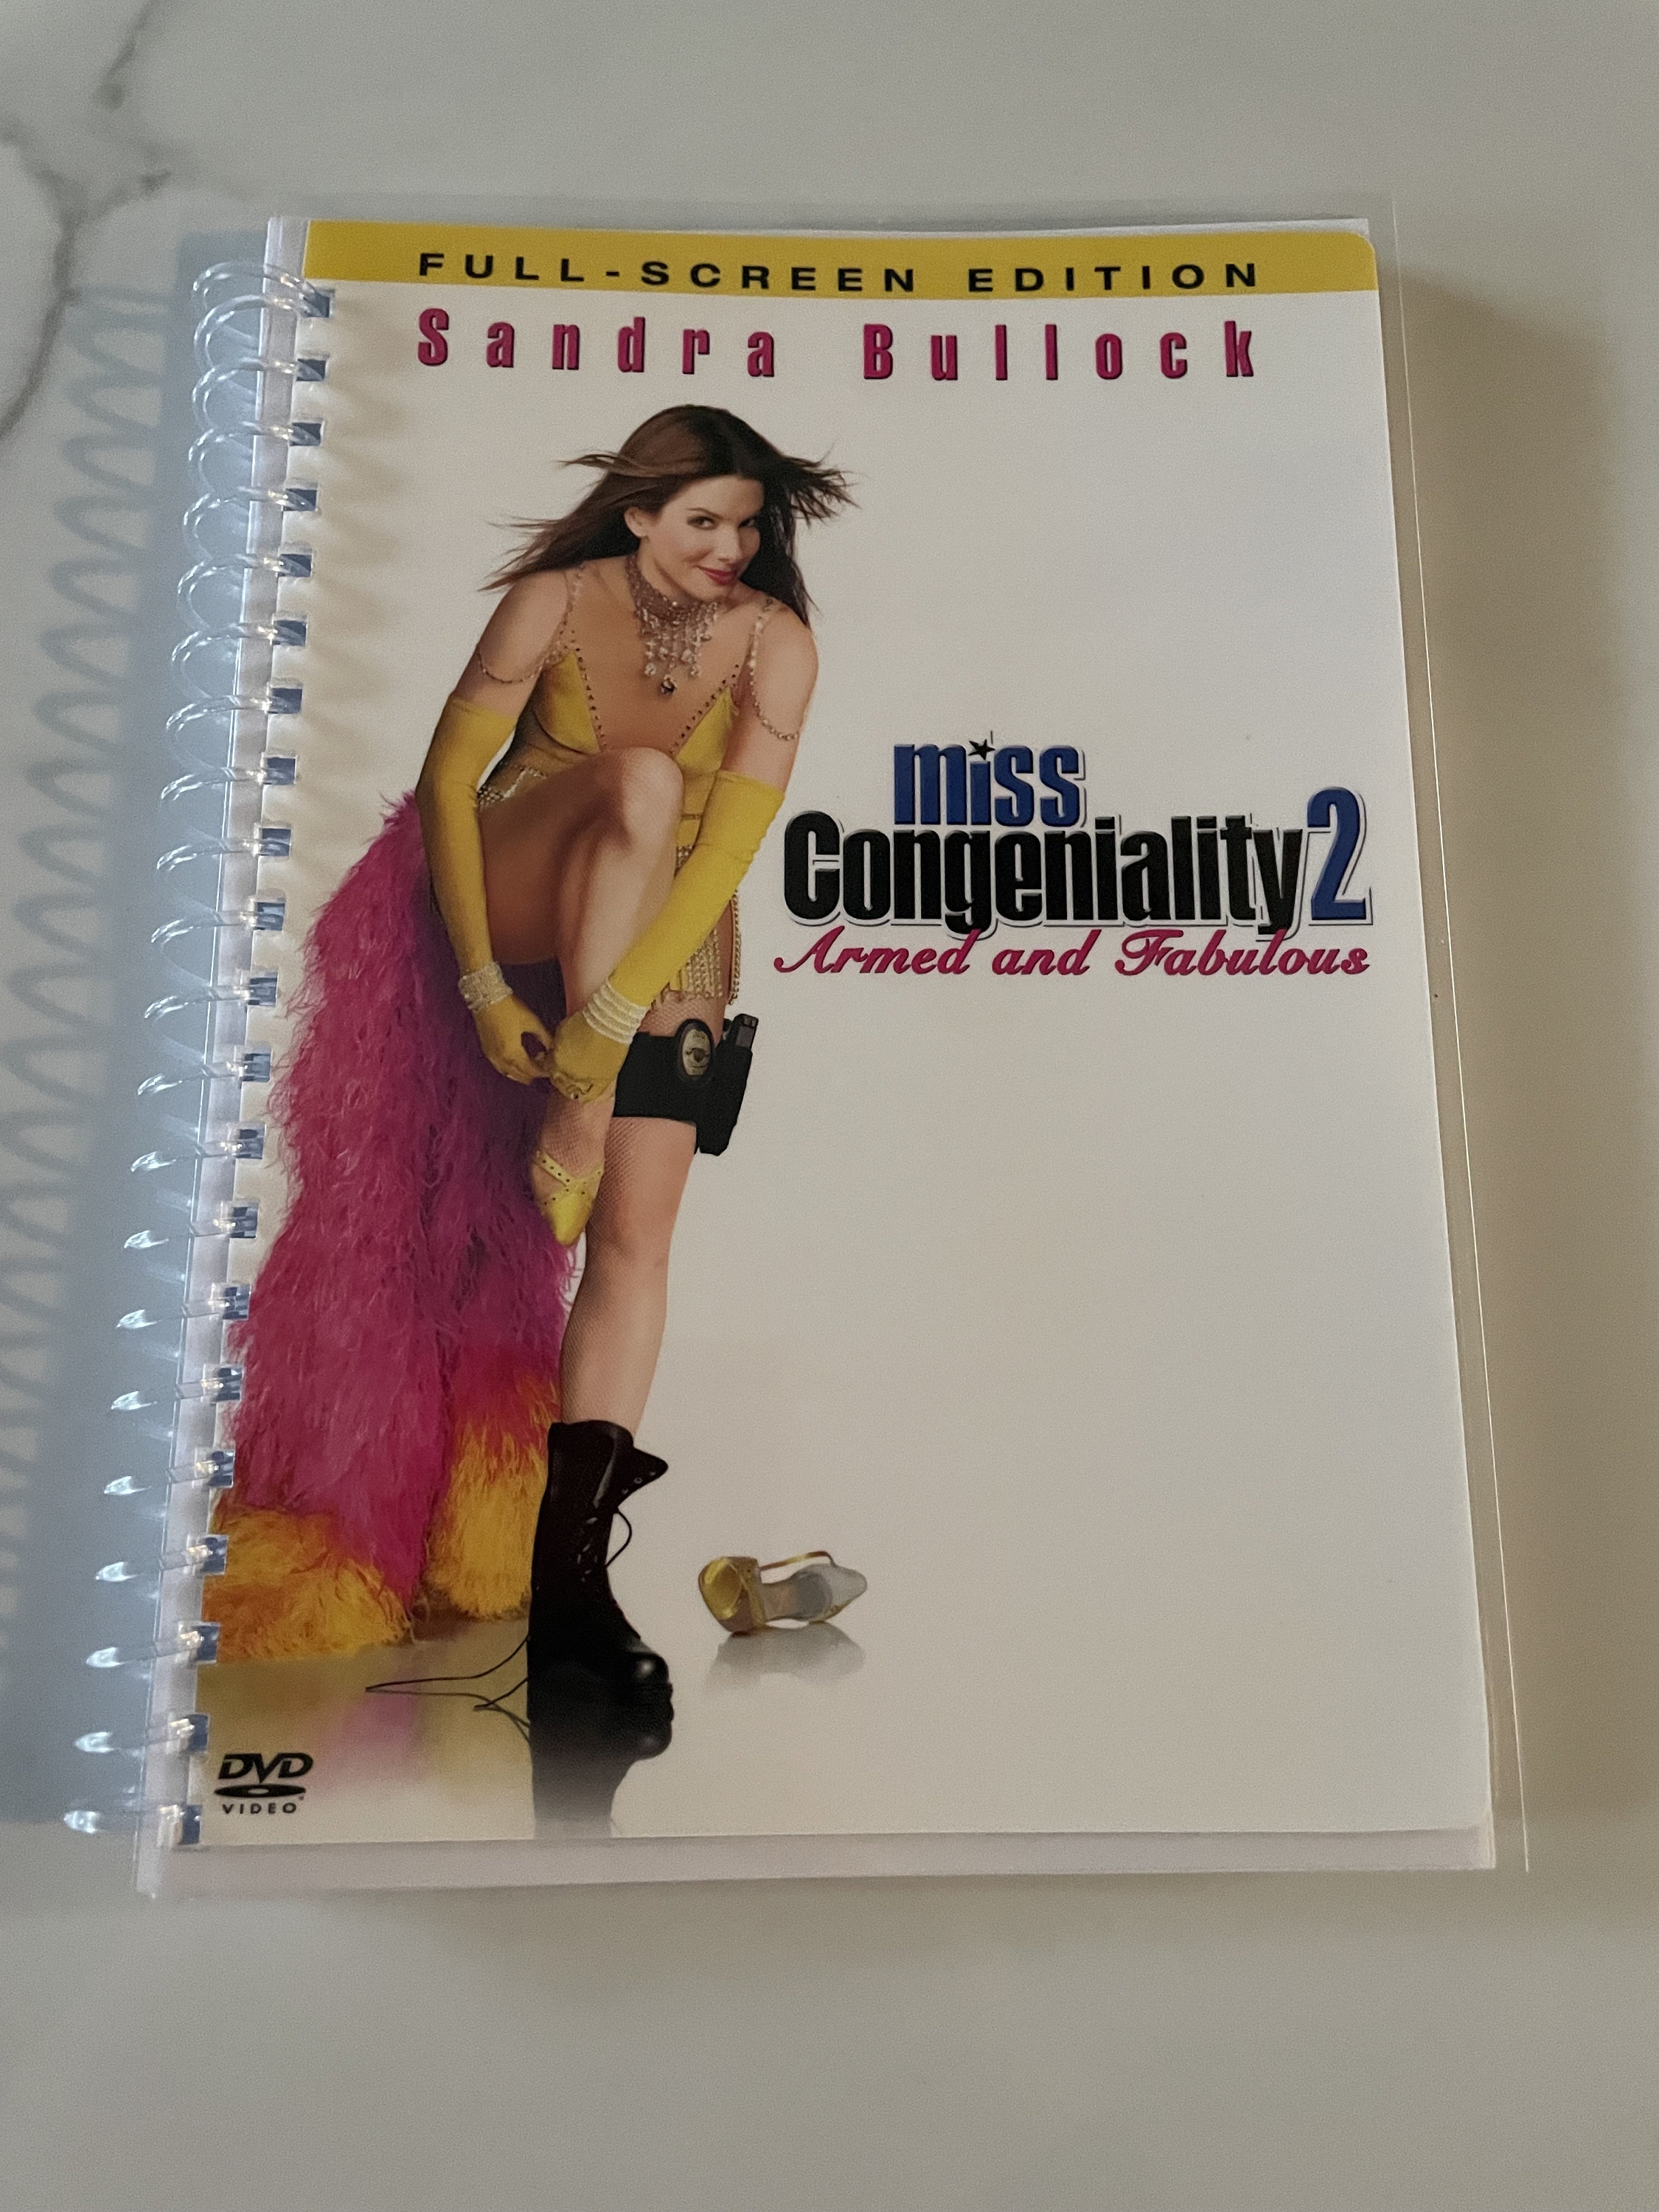 Armed and Fabulous Sandra Bullock 3 movie Bundle - Miss Congeniality/ Miss  Congeniality 2 & Hope Floats 3-DVD Collection